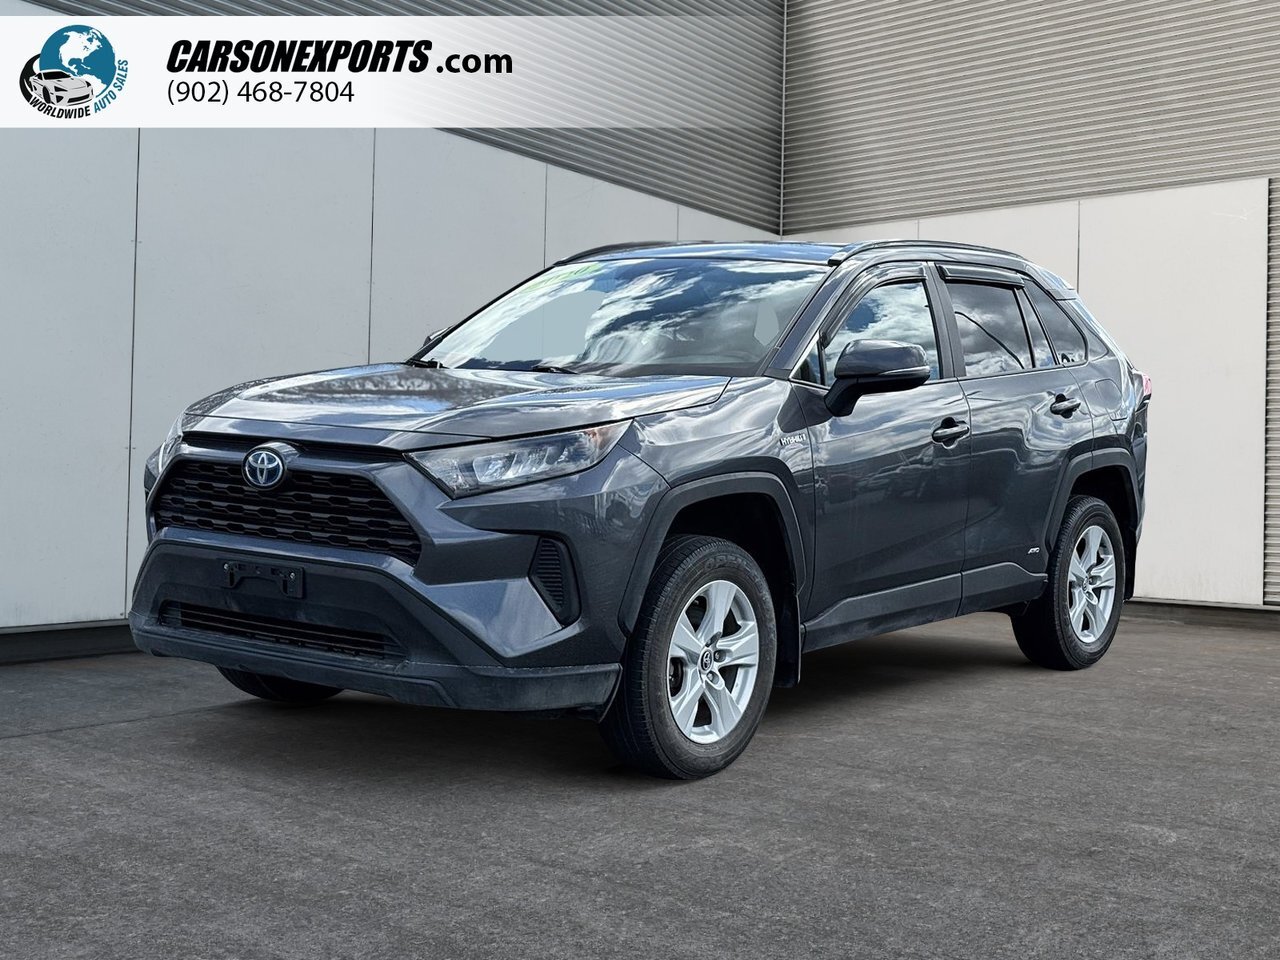 2020 Toyota RAV4 Hybrid LE The best place to buy a used car. Period.